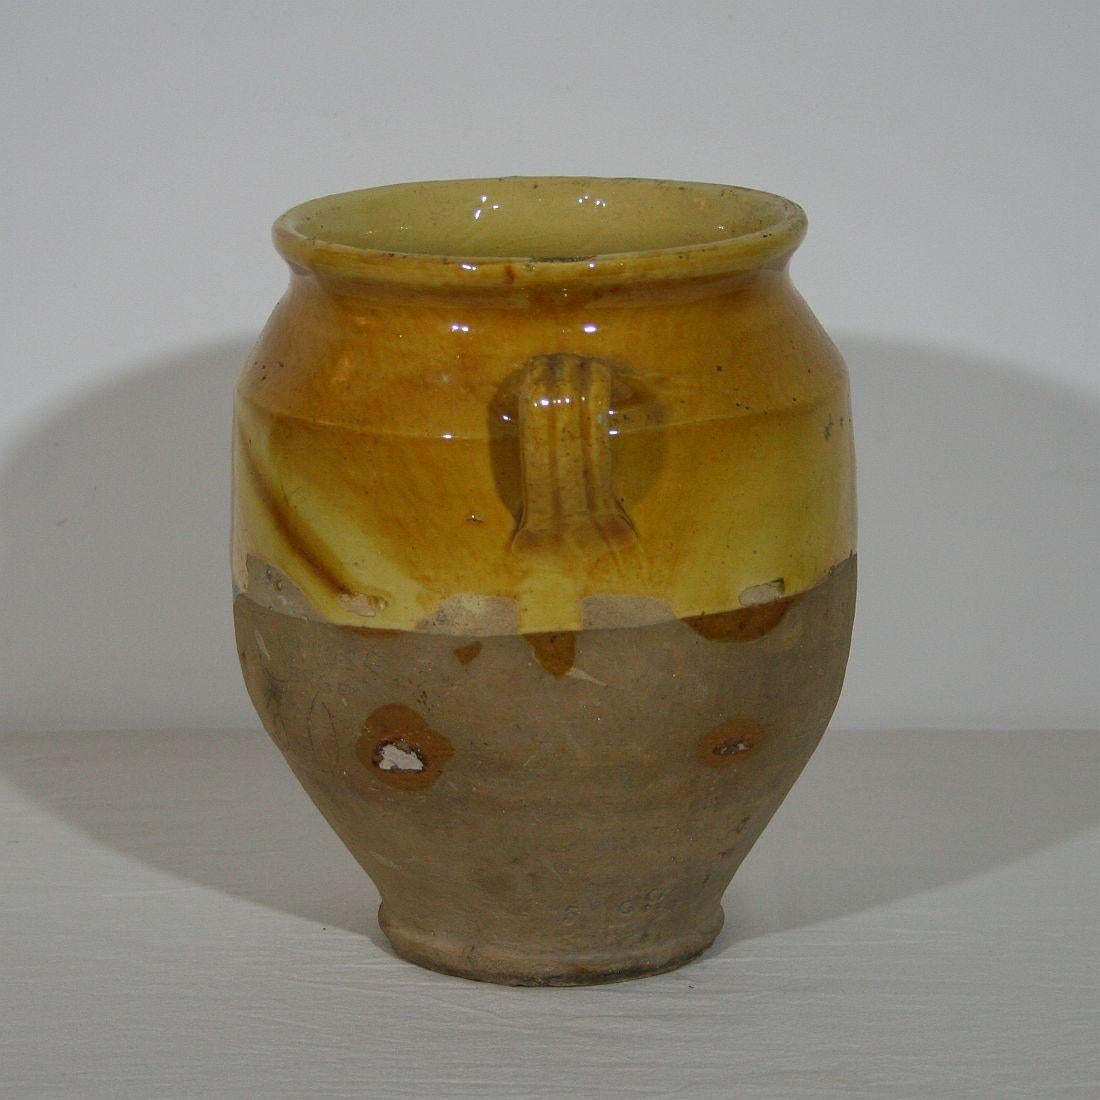 Beautiful weathered confit jar. Confit jars were used primarily in the South of France for the preservation of meats such as duck or goose for dishes such as cassoulet or foie gras. The bottom halves were left unglazed, due to the fact that the pots